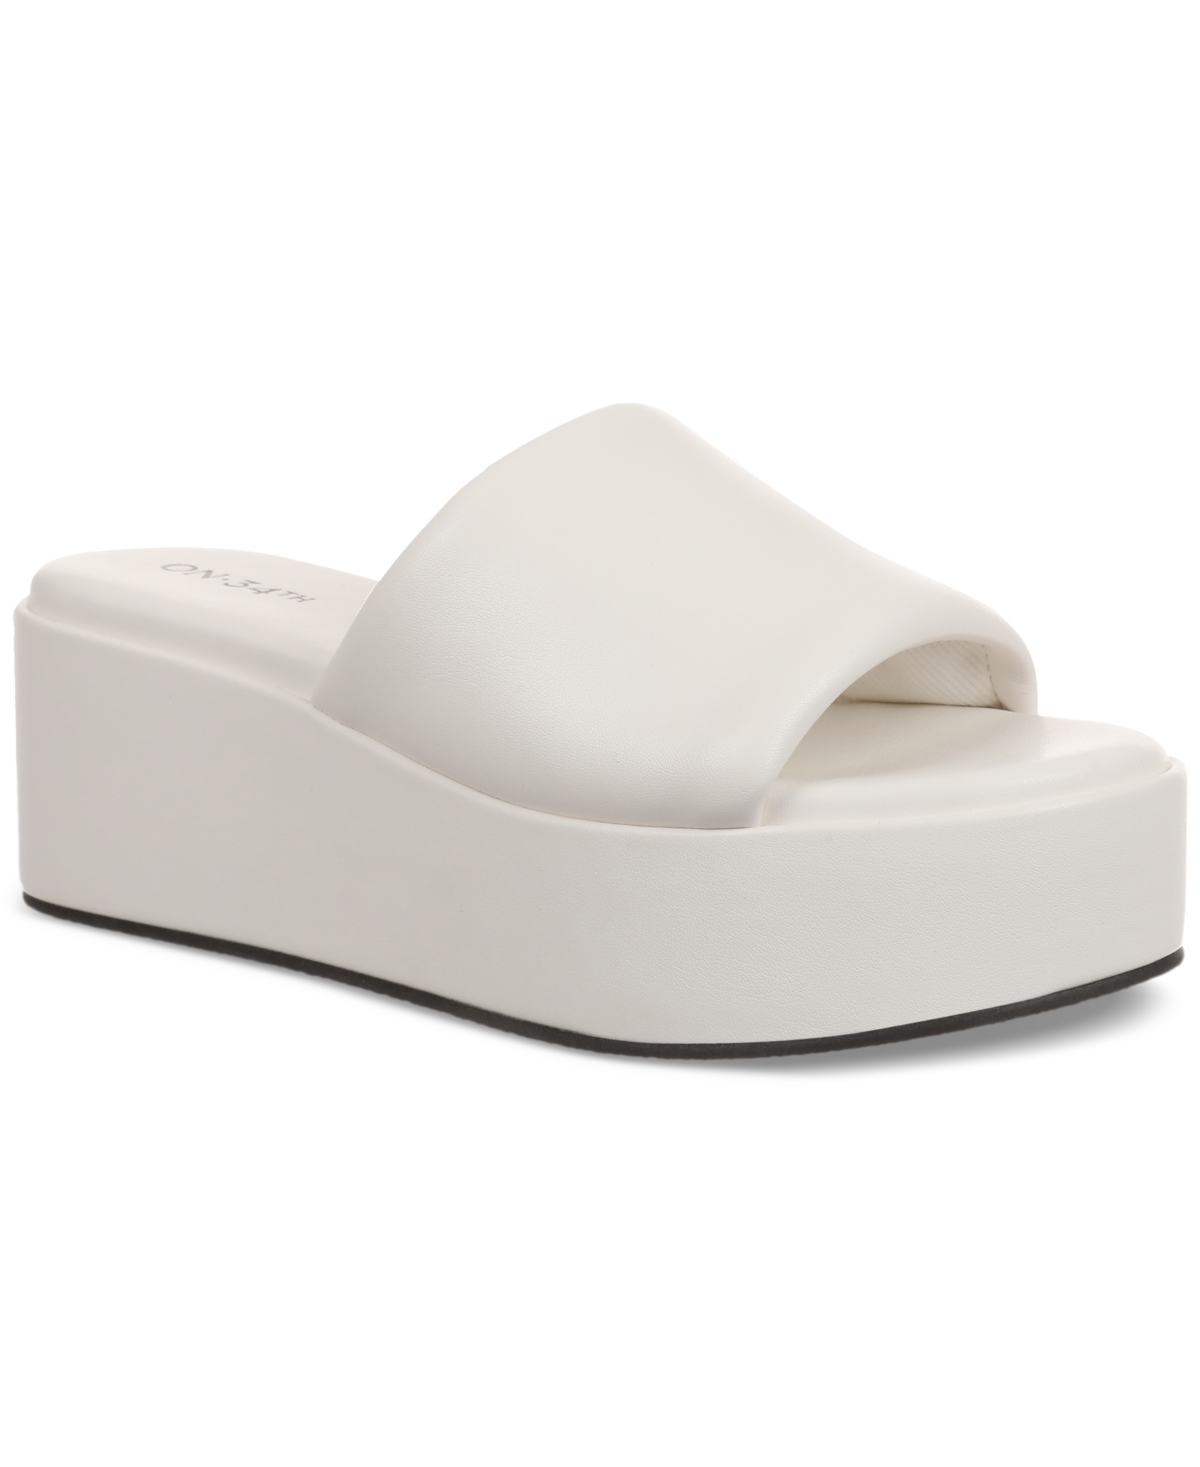 Women's Blliss Slide Flatform Sandals, Created for Macy's - White Smooth